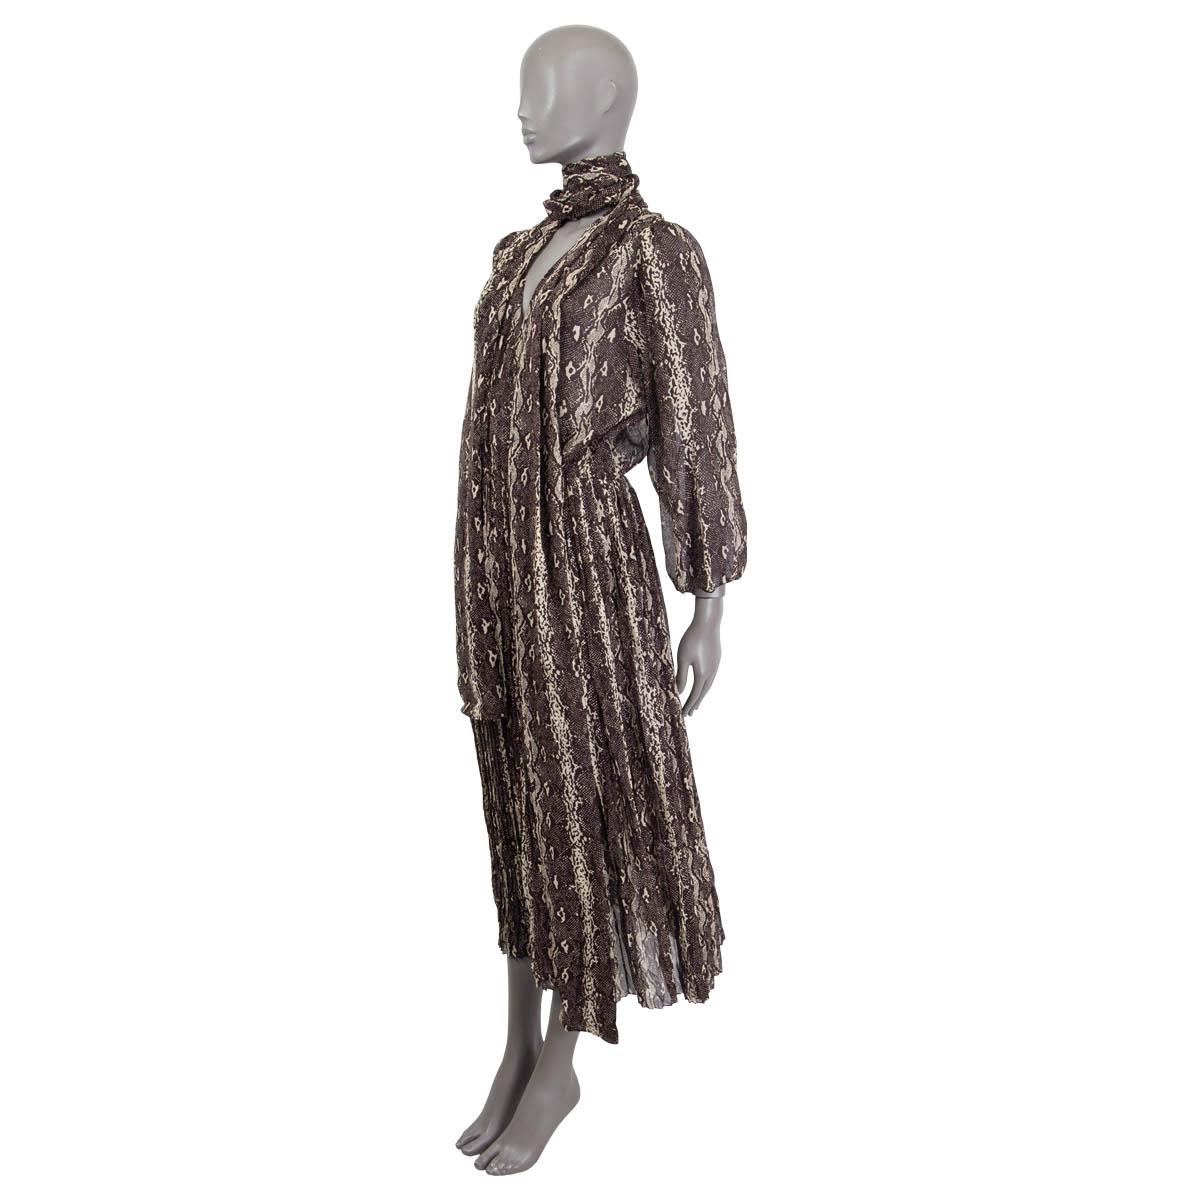 100% authentic Celine pleated fluid maxi dress in brown and ivory georgette silk ( assumed cause tag is missing). Features a snake print, long puffed sleeves and a deep v-neck. Has a detachable belt. Opens with a concealed zipper on the side.